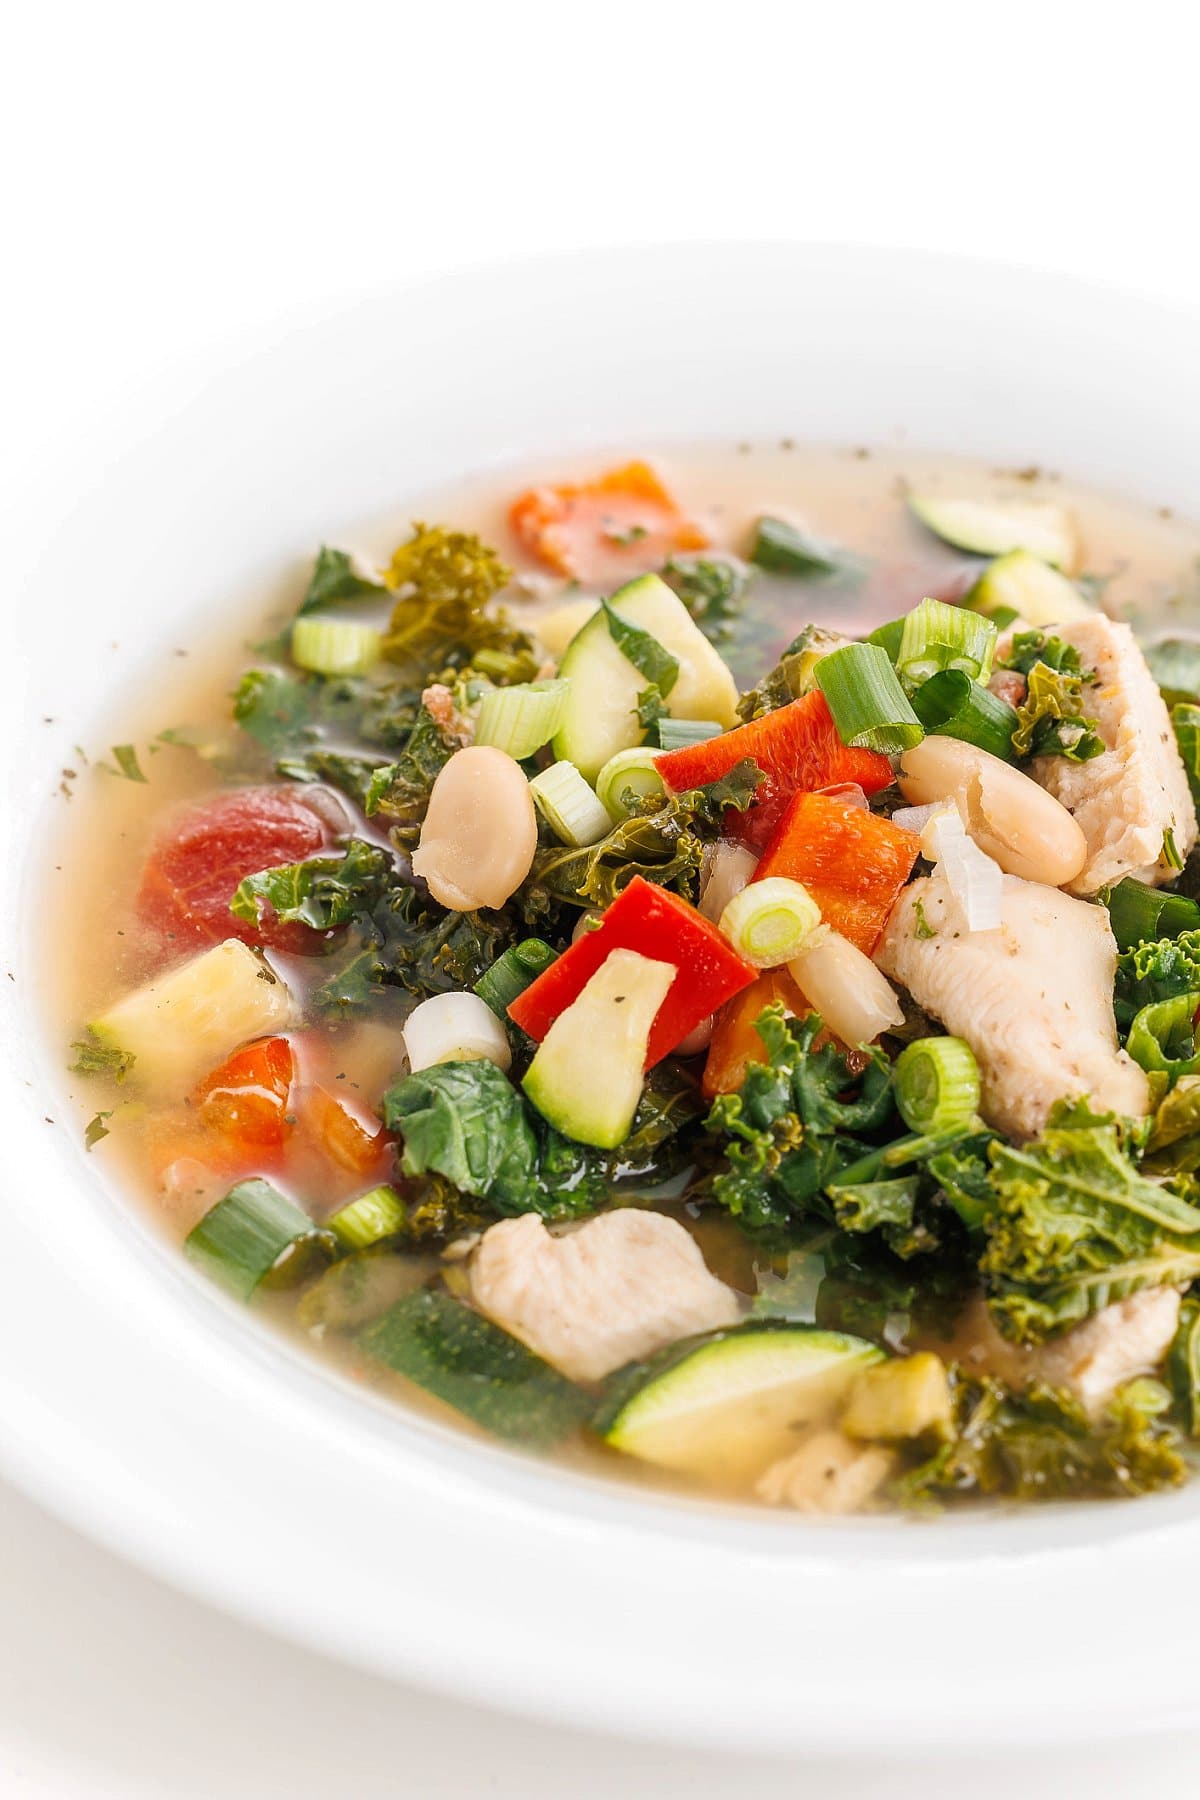 Slow Cooker Italian Chicken Soup shown in white bowl.